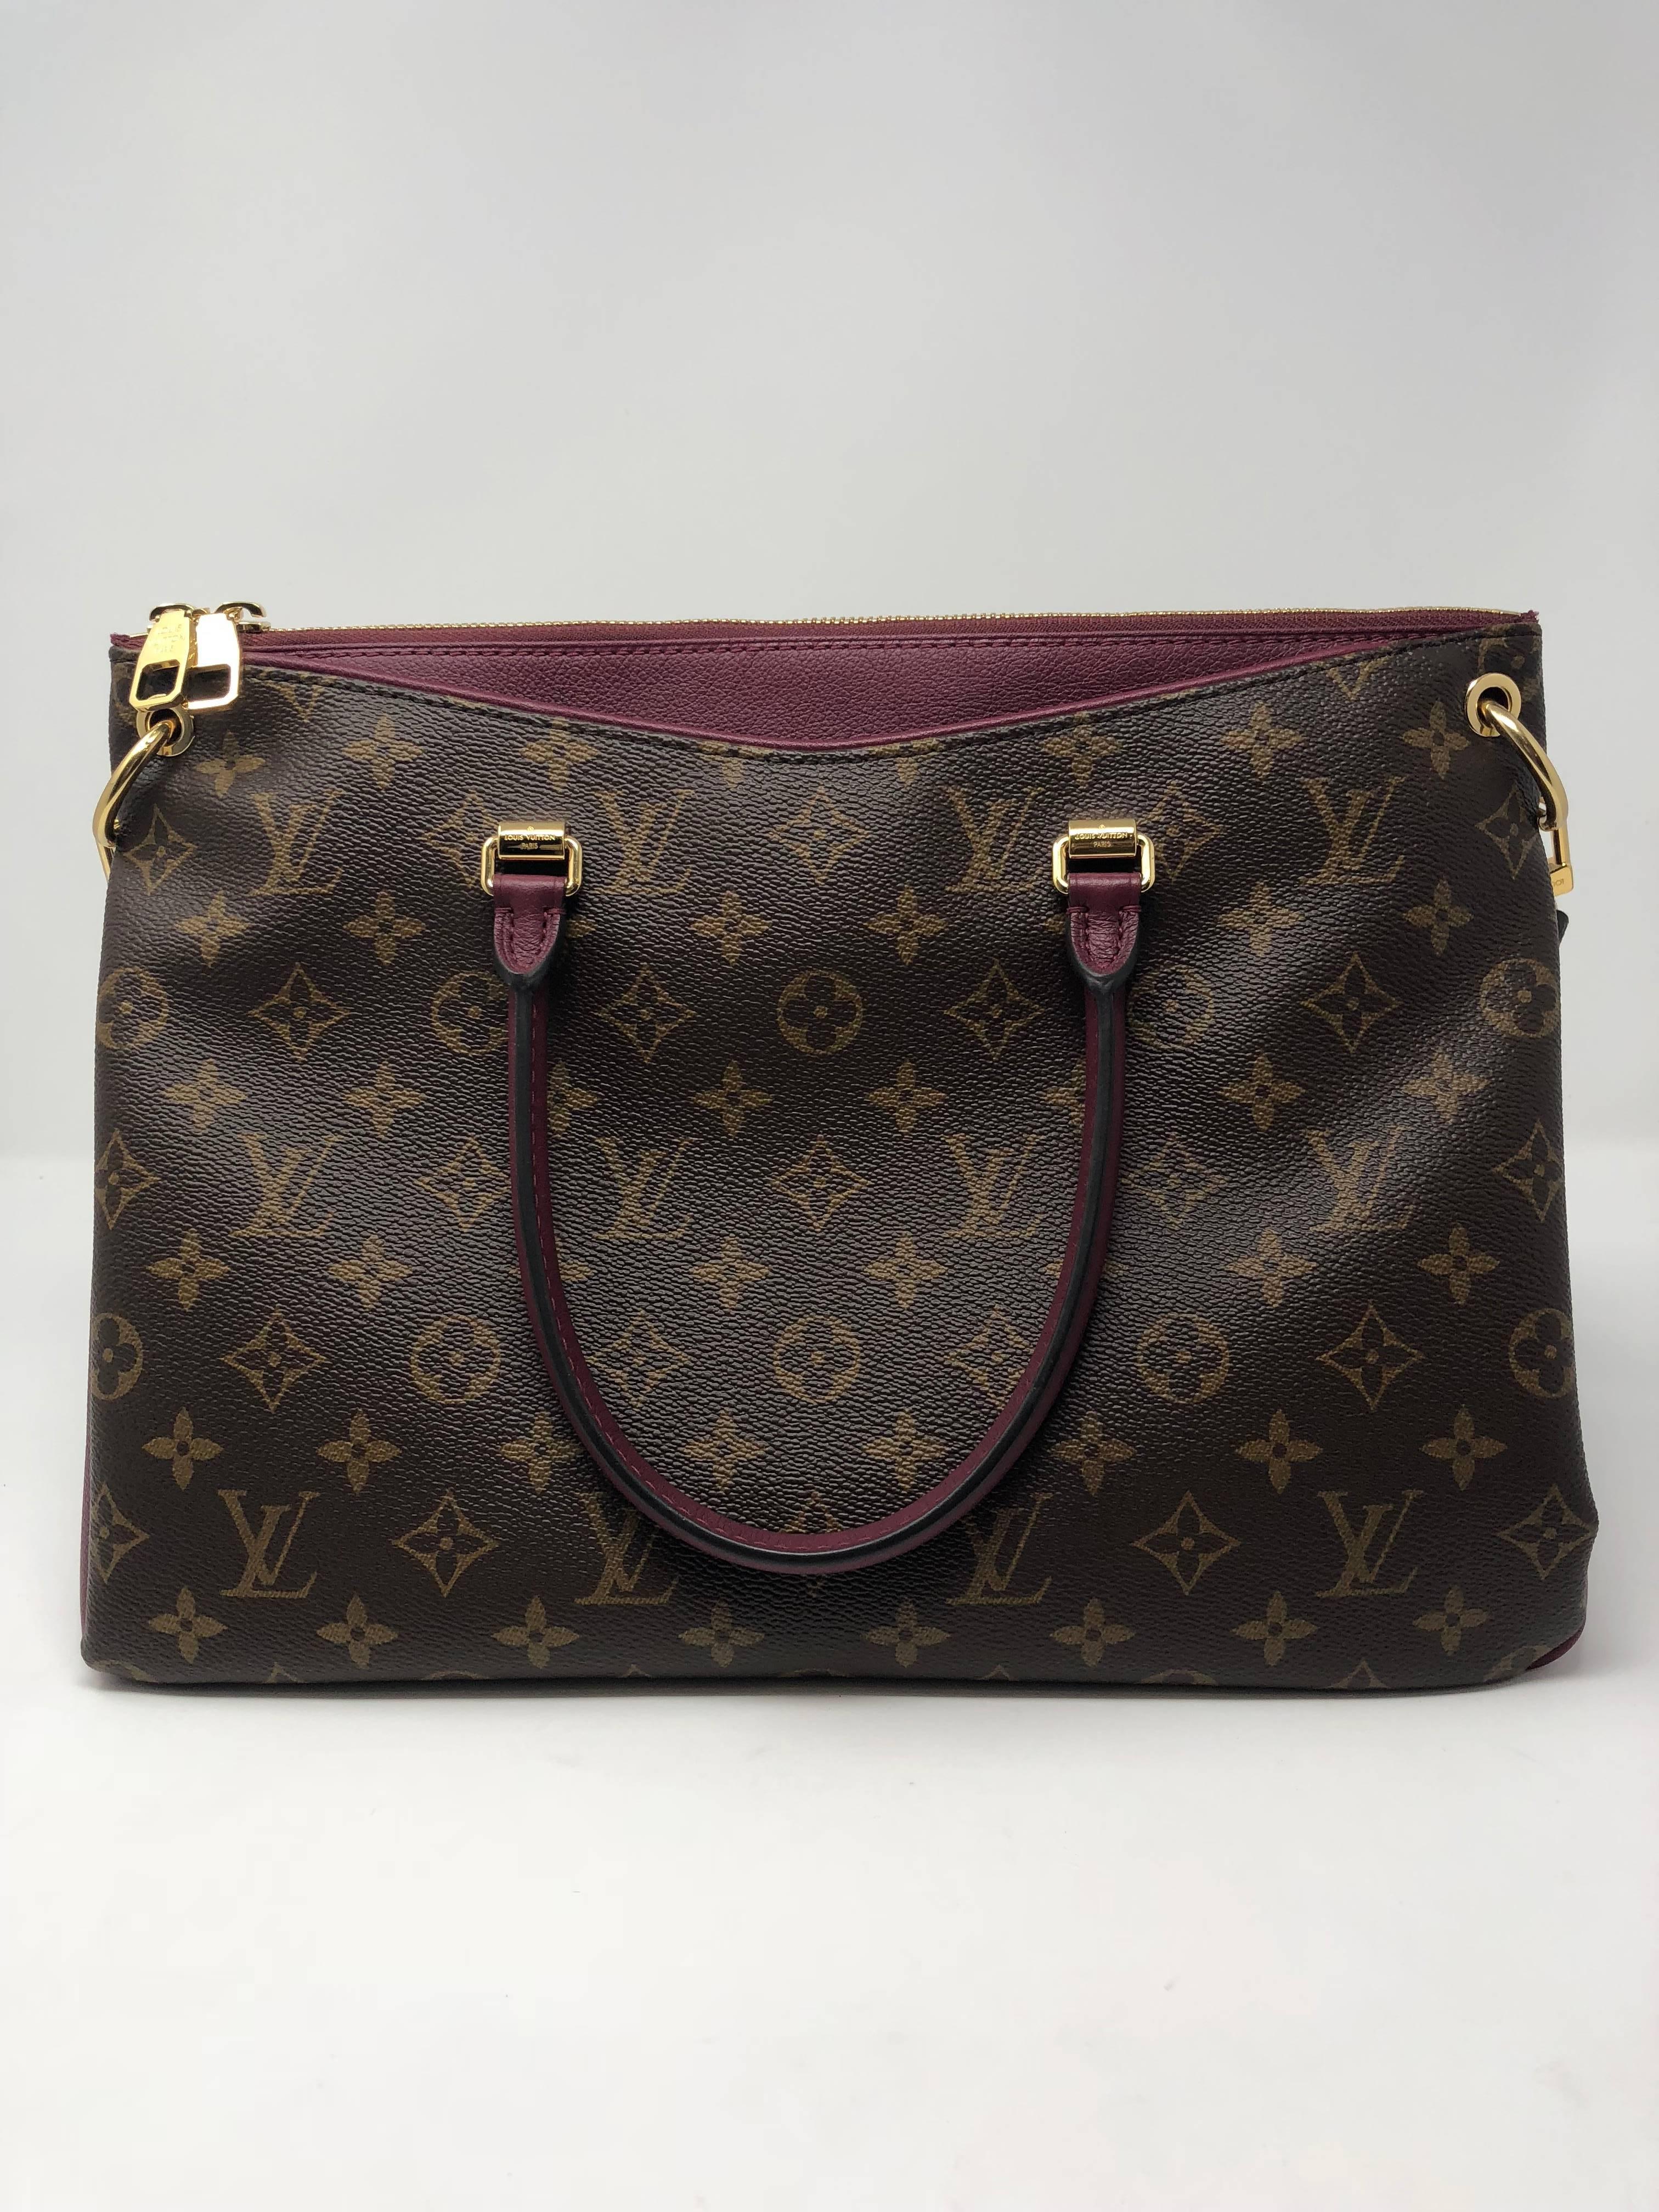 Louis Vuitton monogram and burgundy trim Pallas BB tote with additional strap. Mint condition and versatile bag can be worn two ways. Guaranteed authentic. 